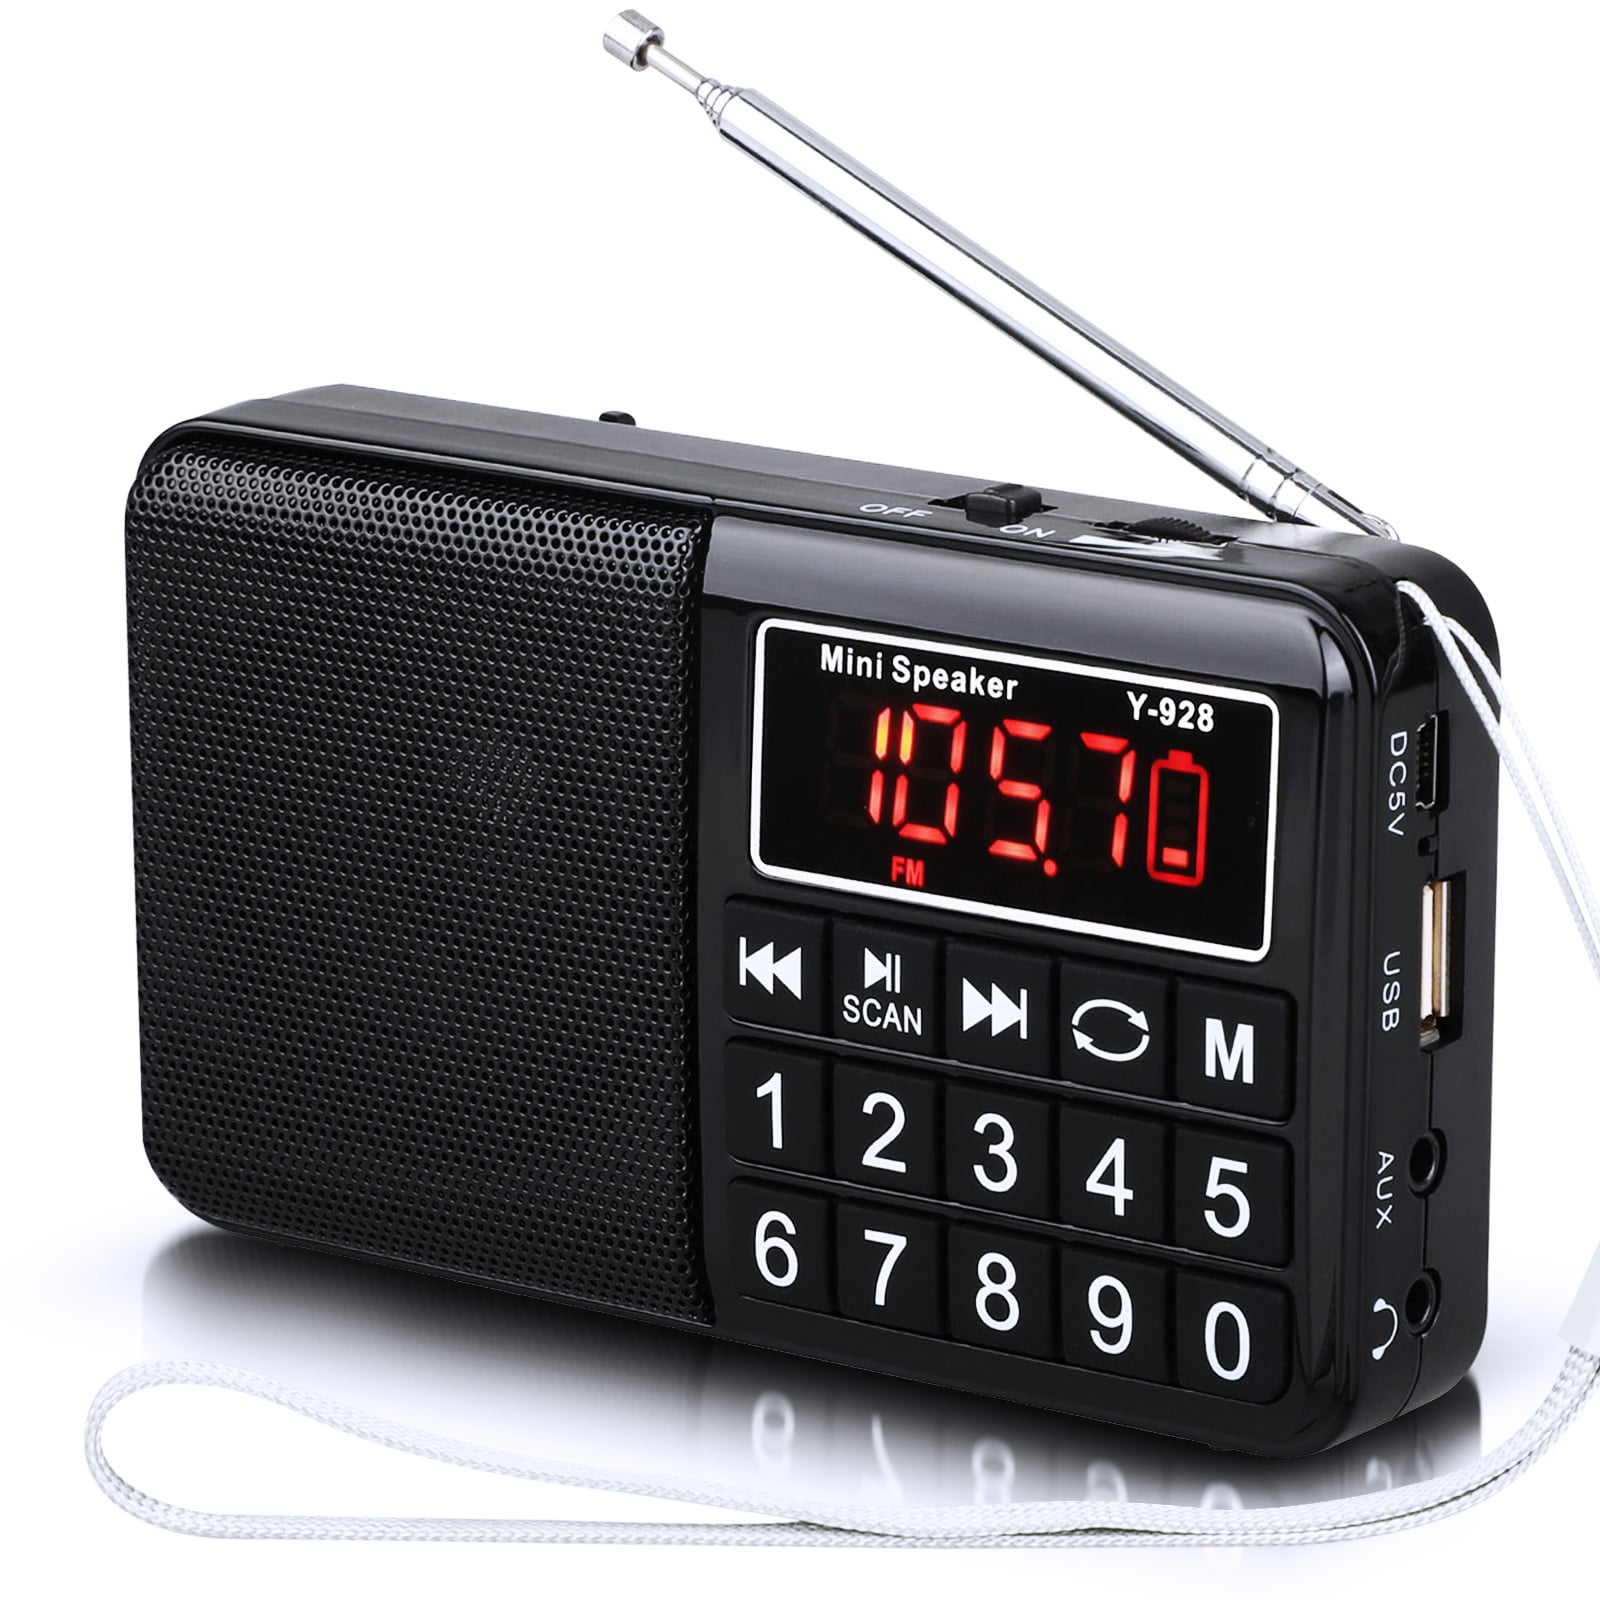 TSV FM Battery Operated Portable Pocket Radio - Best Reception and